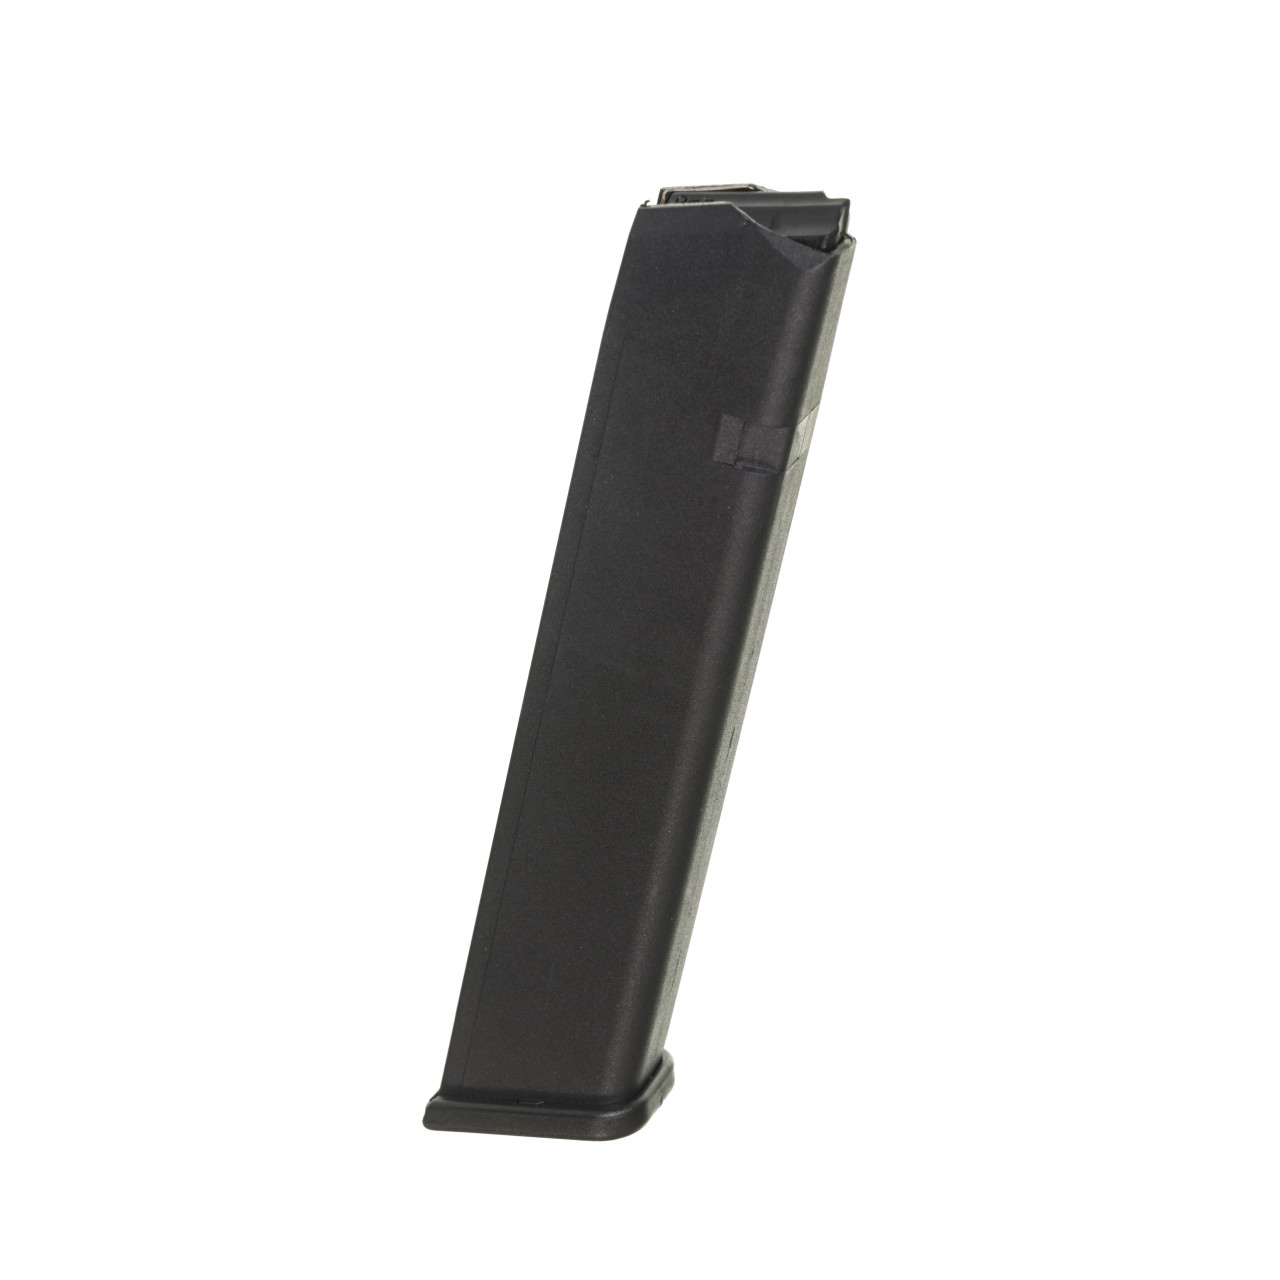 GLOCK 9mm 10 Round Magazine 3206 Old Style for sale online 